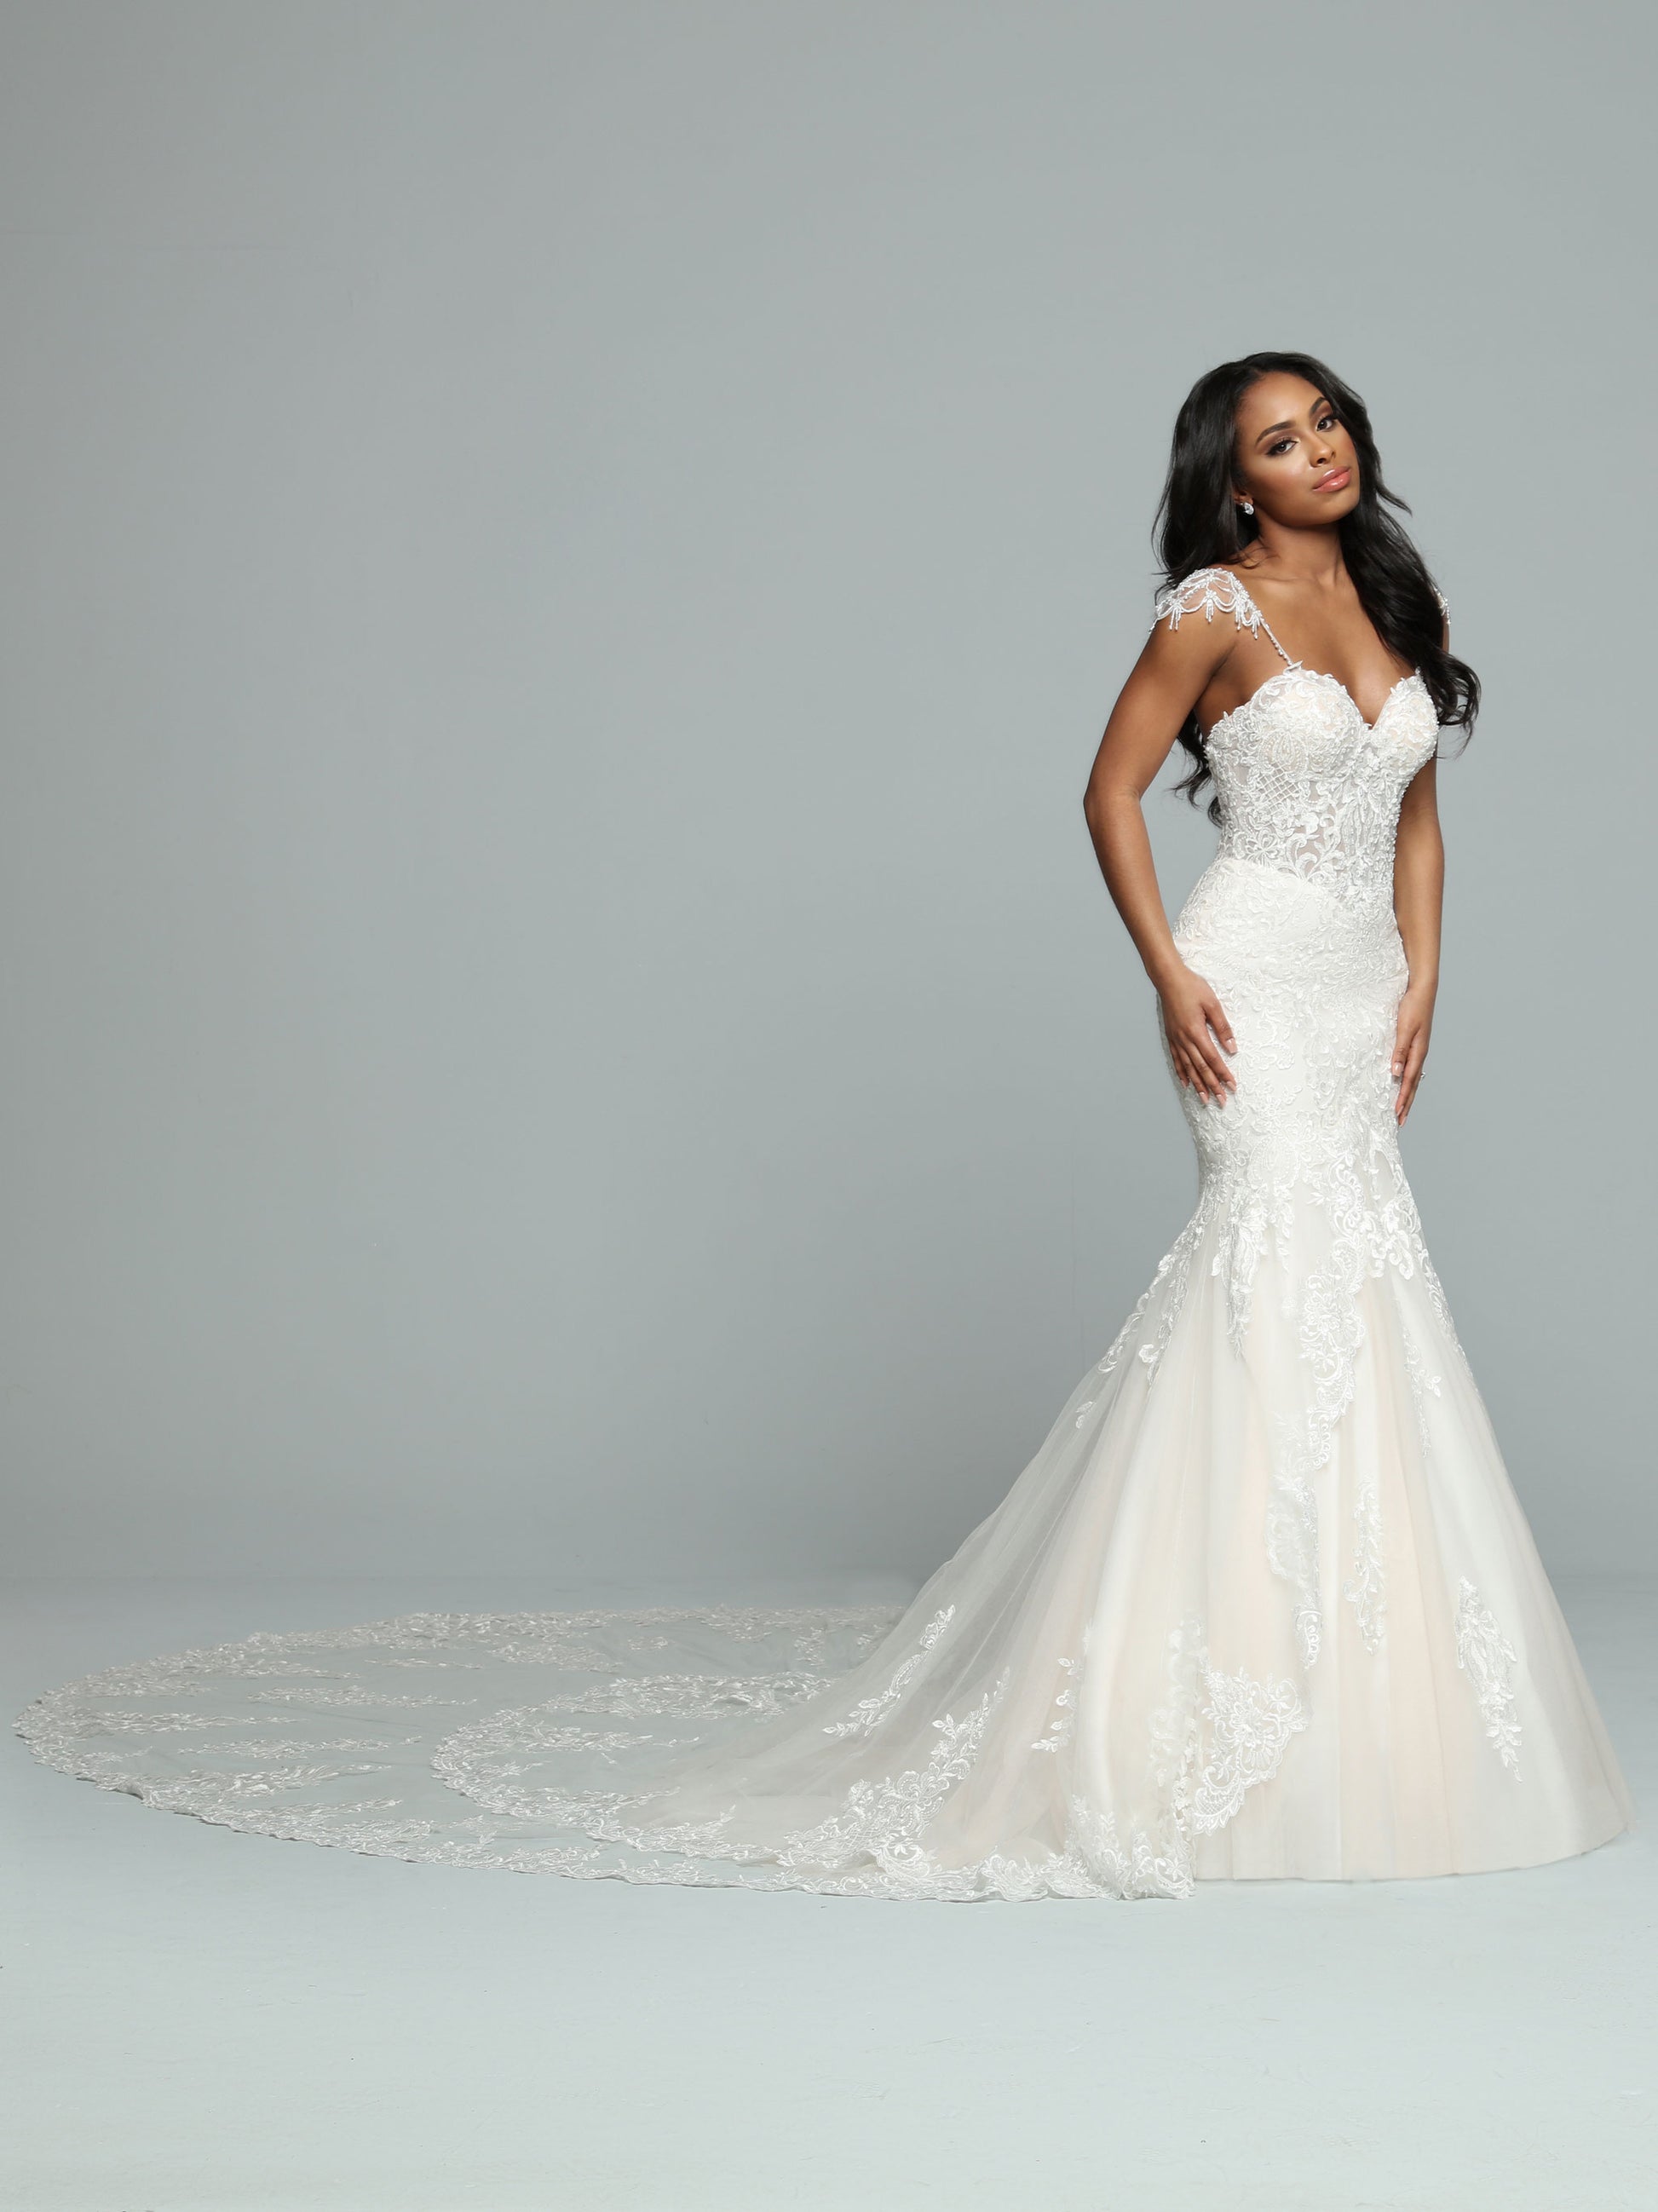 Davinci Bridal 50662 is a stunning long lace formal wedding dress. mermaid silhouette with a sheer lace corset bodice and crystal cap sleeves. Long double layered train with lace embellishments.  Available Size: 14  Available Color: Ivory/Ivory